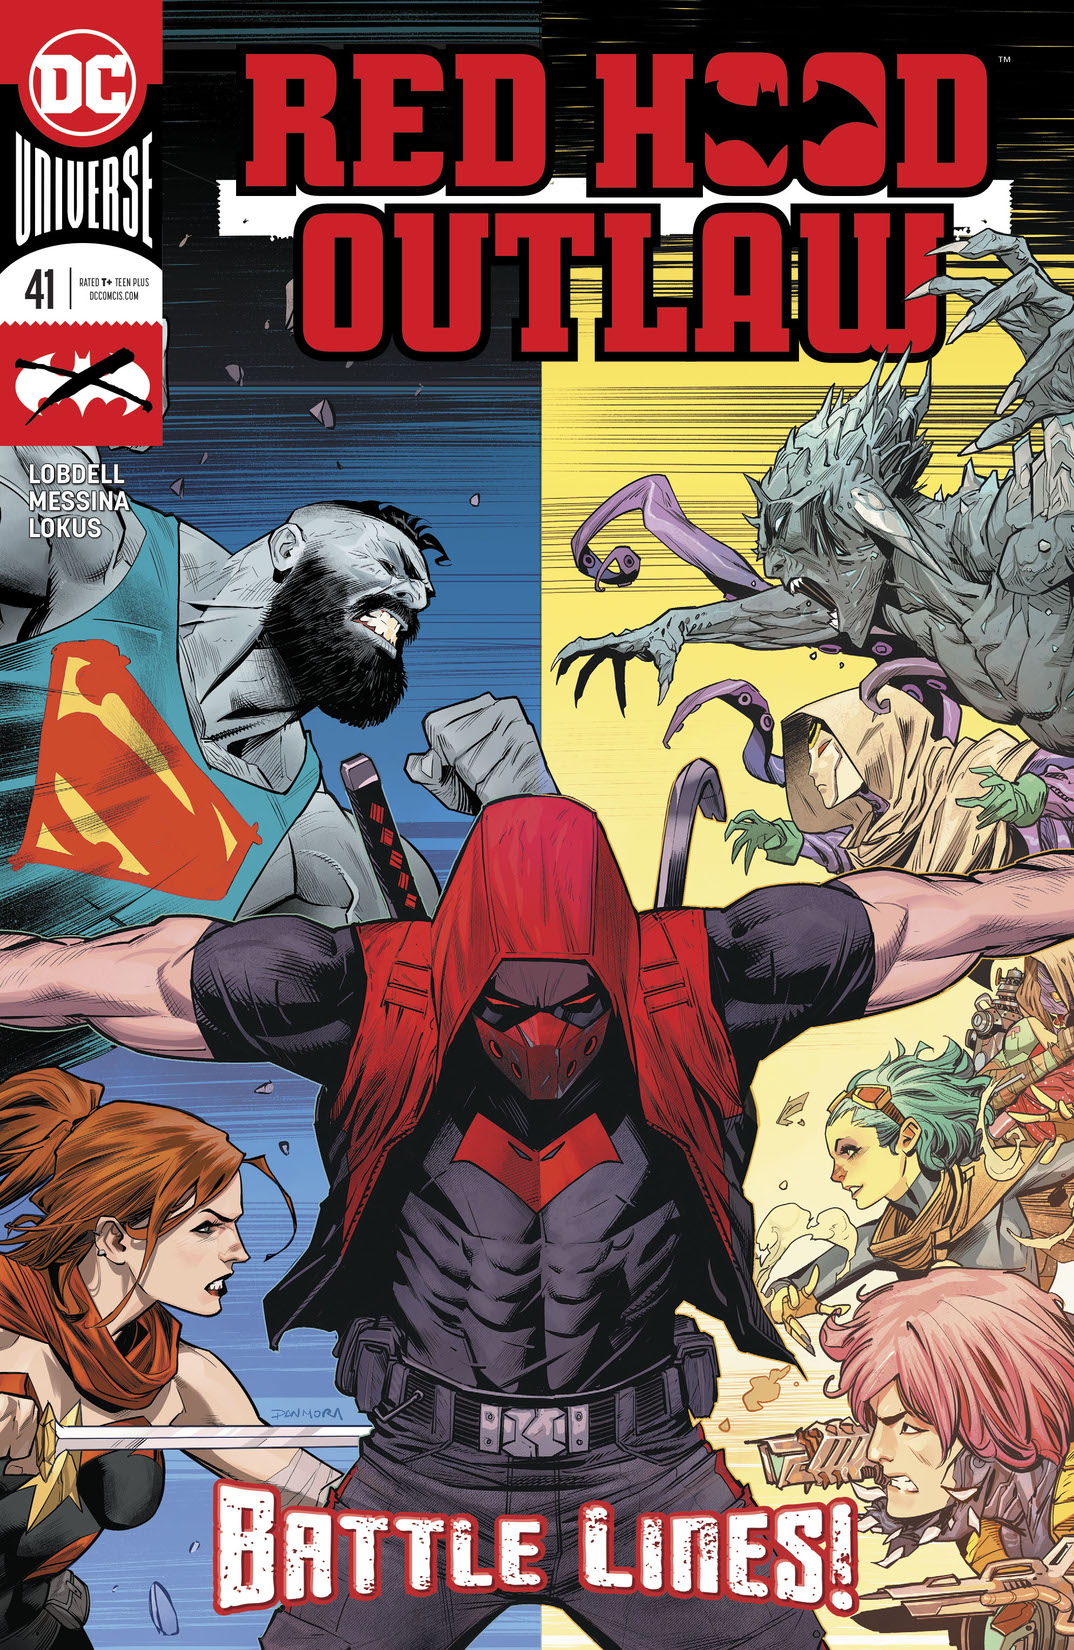 Red Hood: Outlaw (2016-) #41 preview images